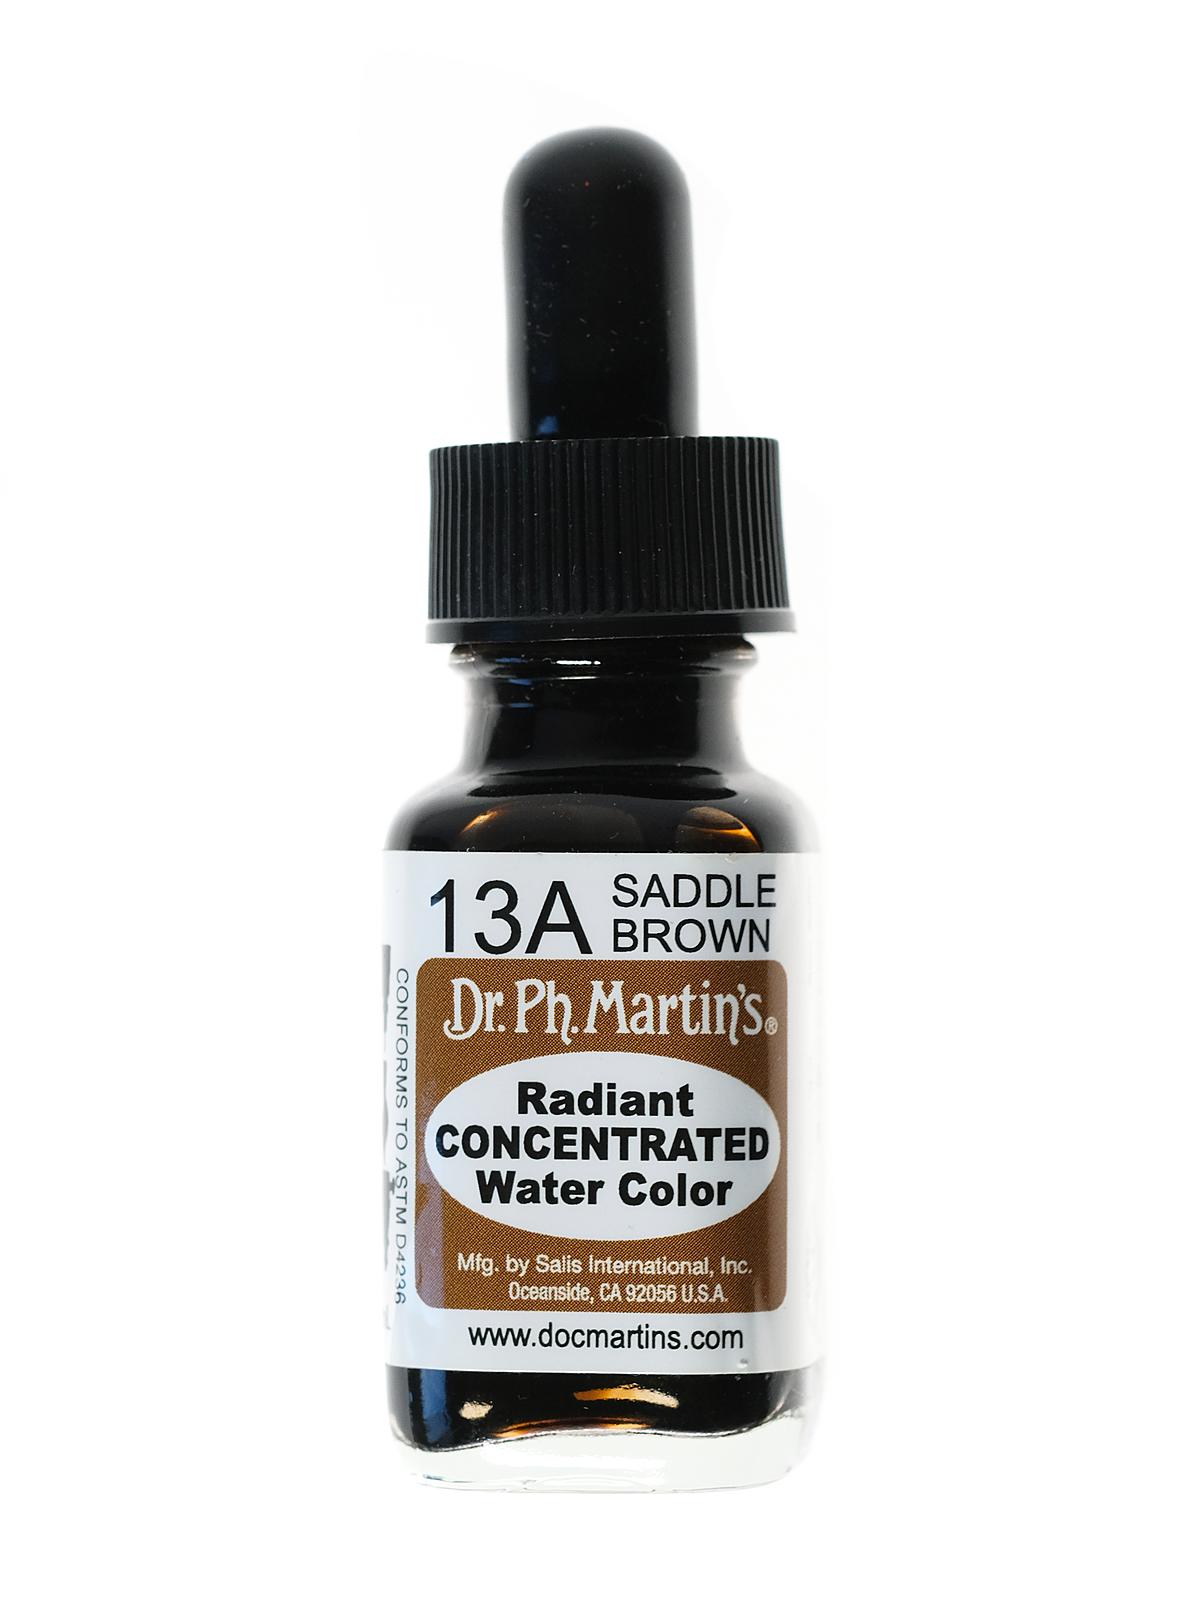 Radiant Concentrated Watercolors Saddle Brown 1 2 Oz.